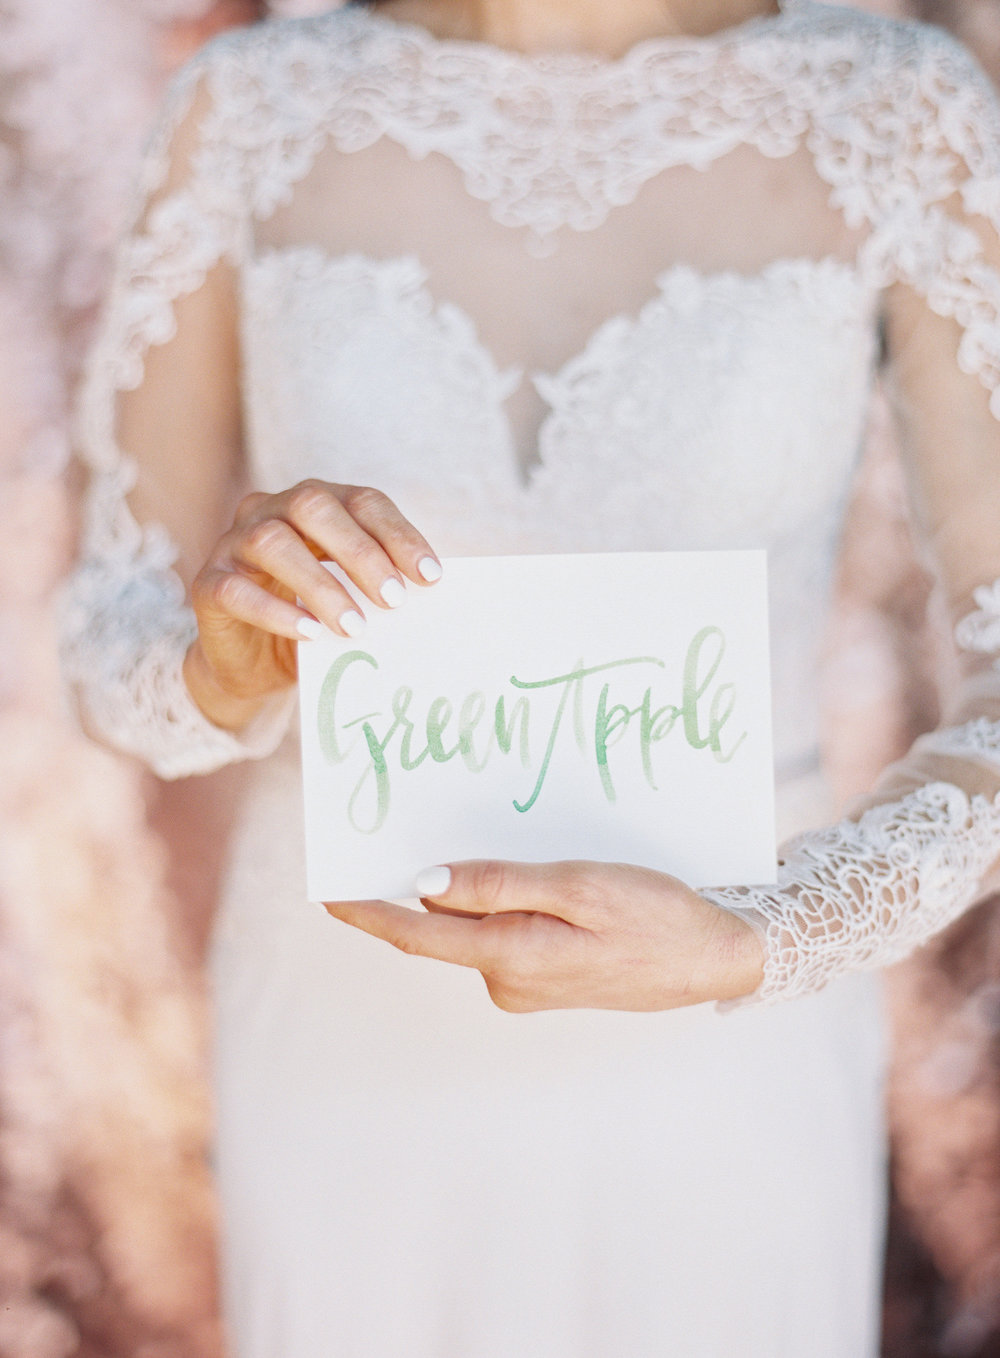 Rose Gold Wedding Details | The Loft on Pine Wedding | Green Apple Event Co | Sposto Photography